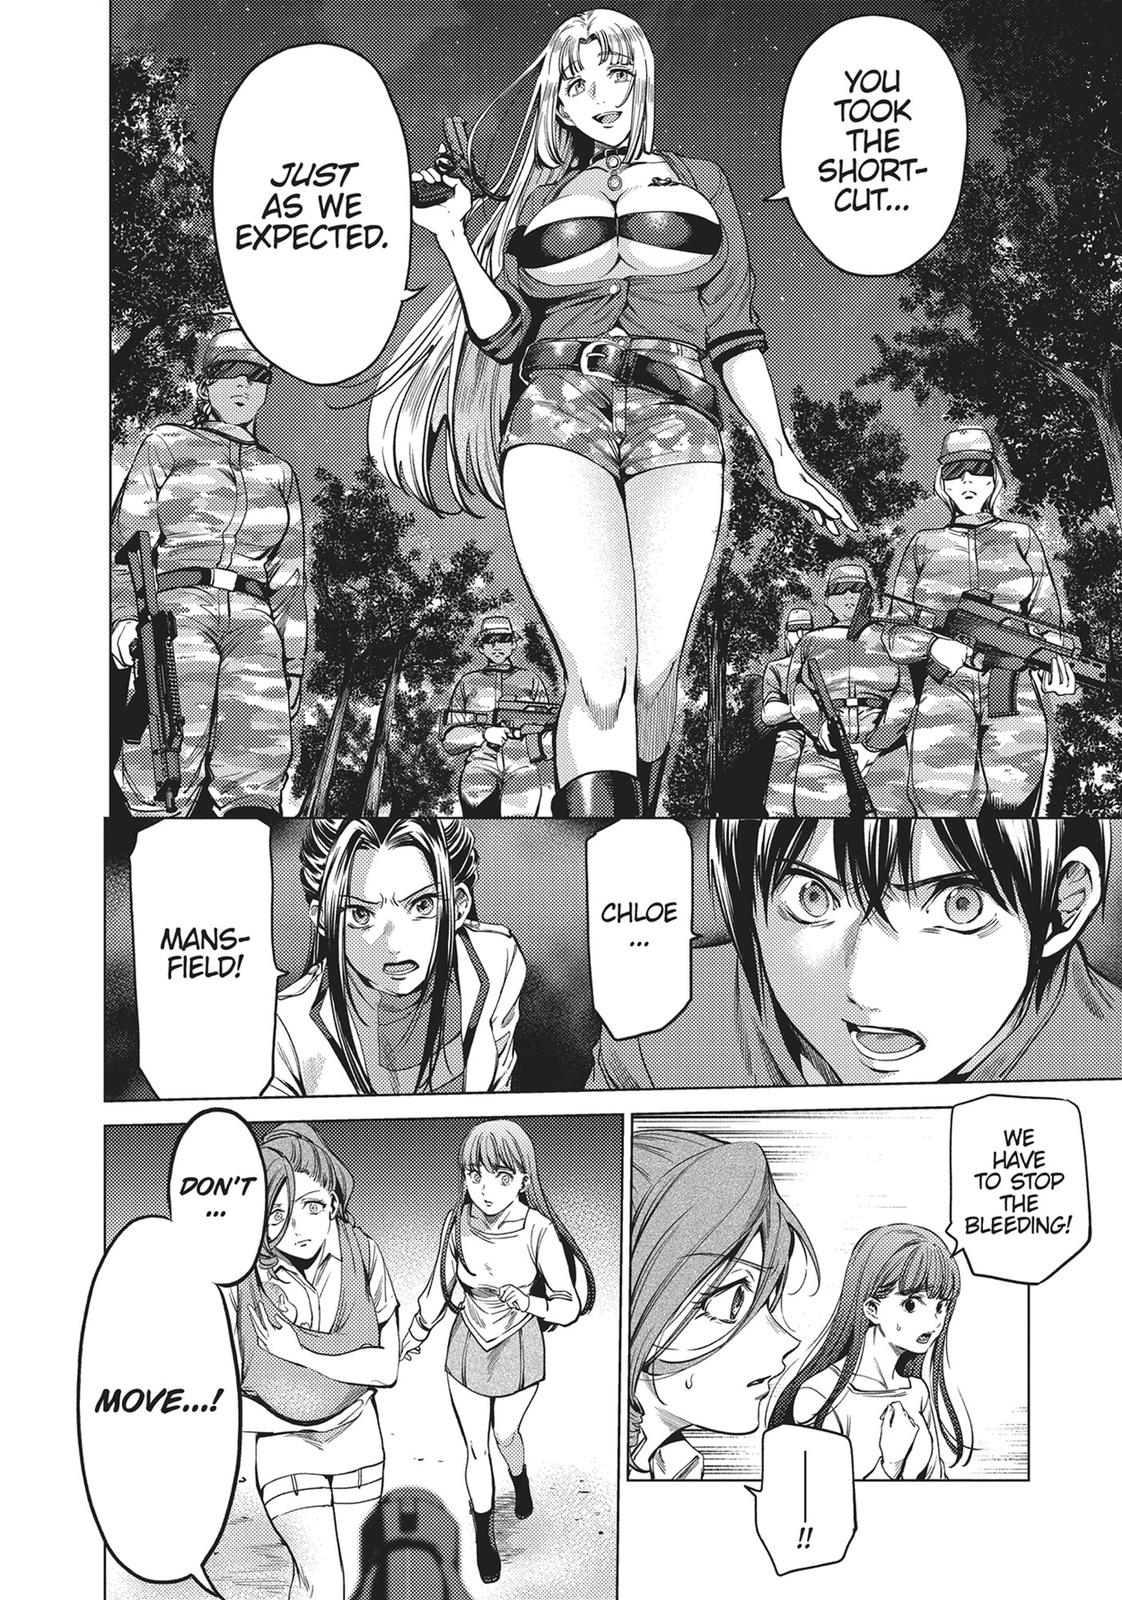 World's End Harem, Chapter 84  TcbScans Net - TCBscans - Free Manga Online  in High Quality